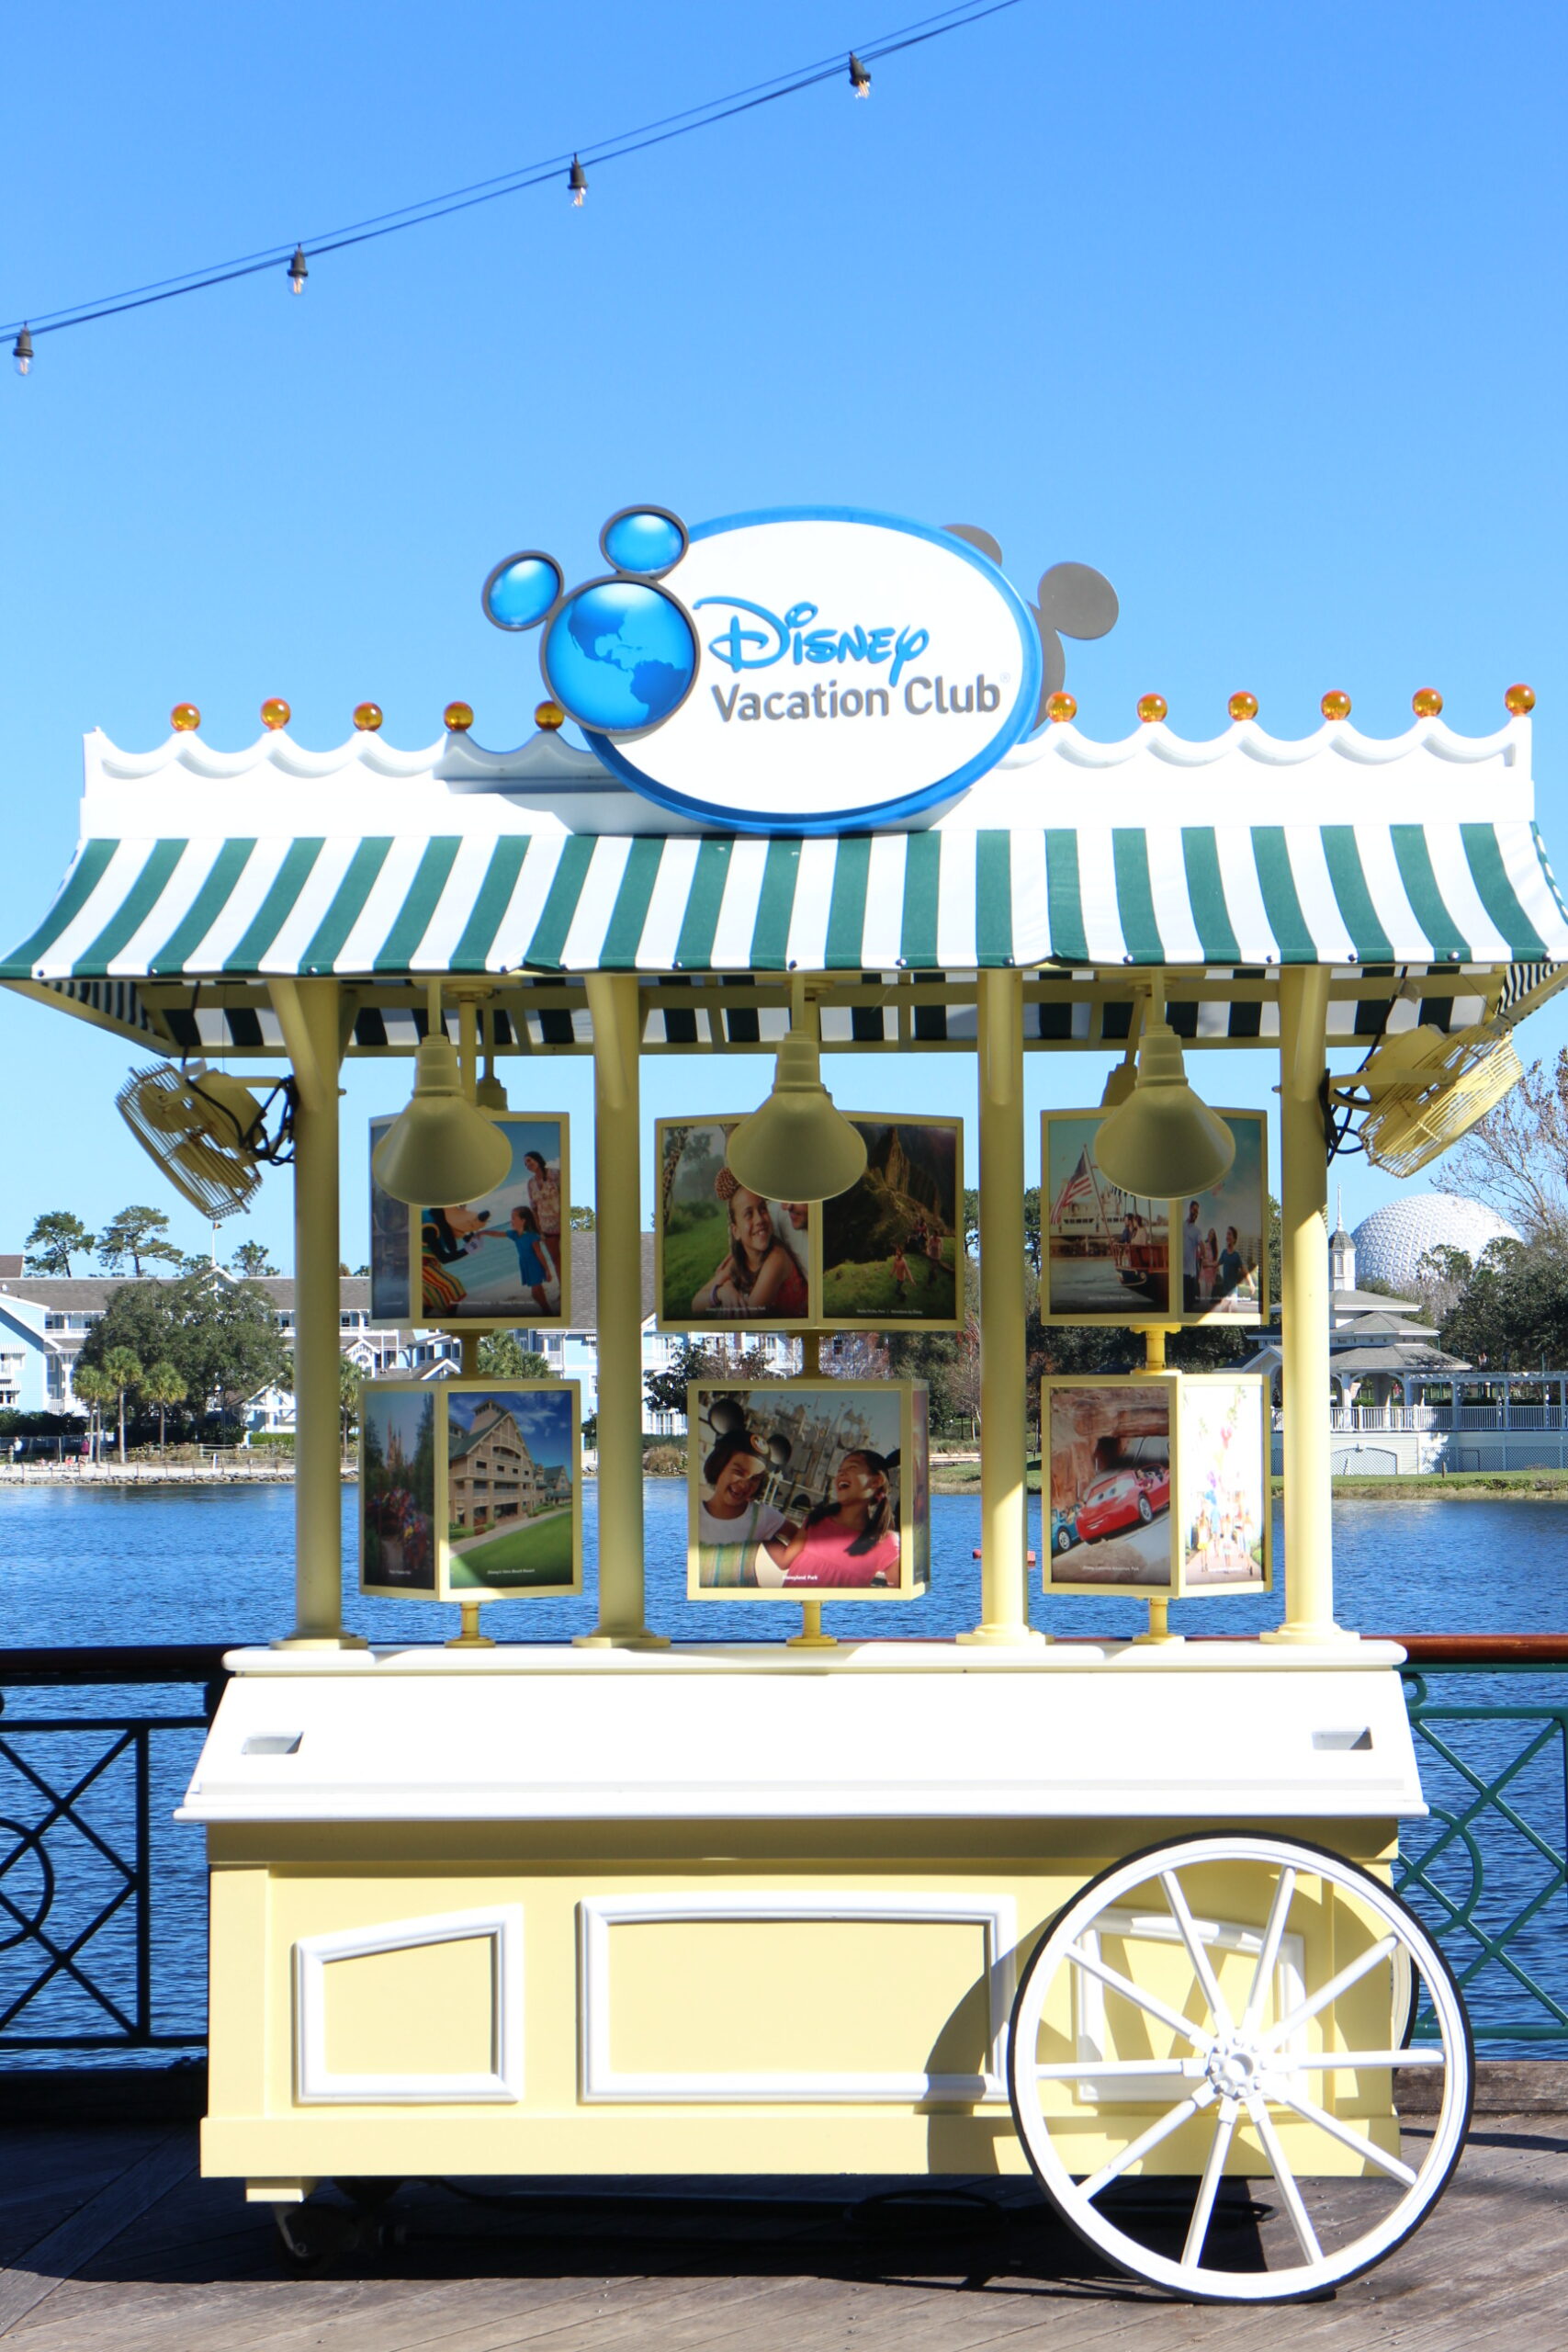 a Disney Vacation Club information cart with a blue and white striped awning